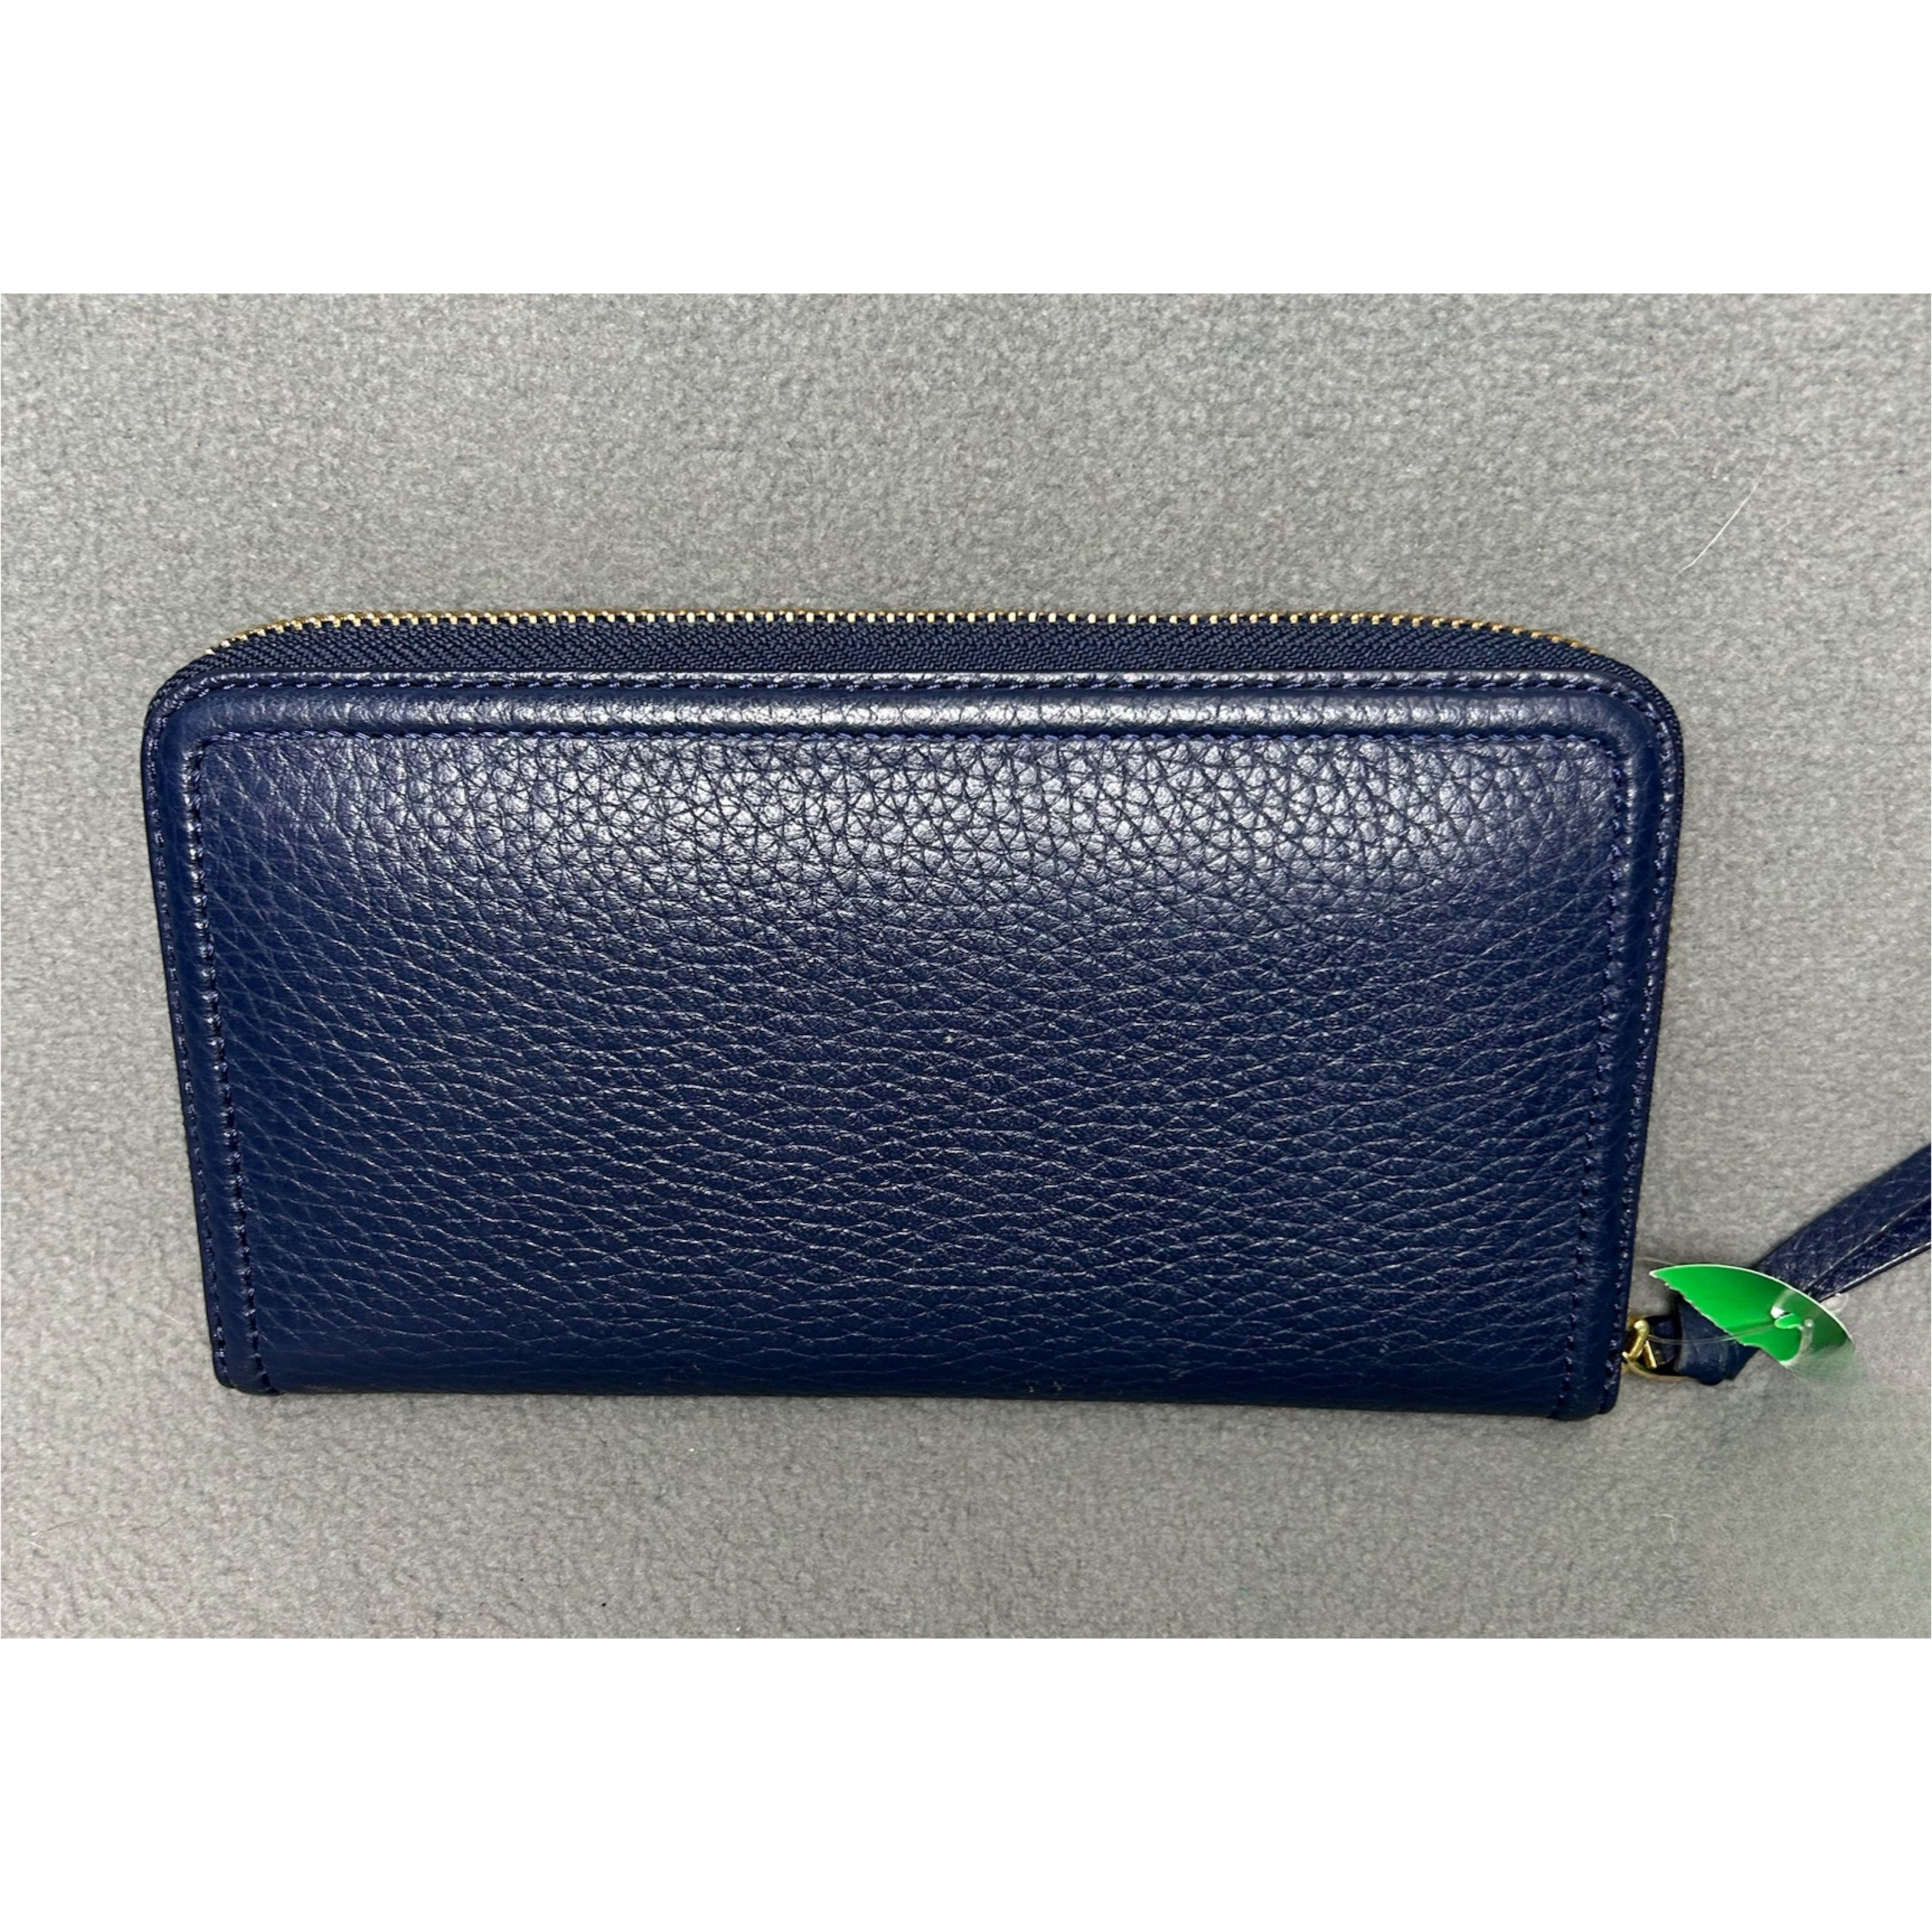 Tory Burch navy Continental zip wallet, LIKE NEW!